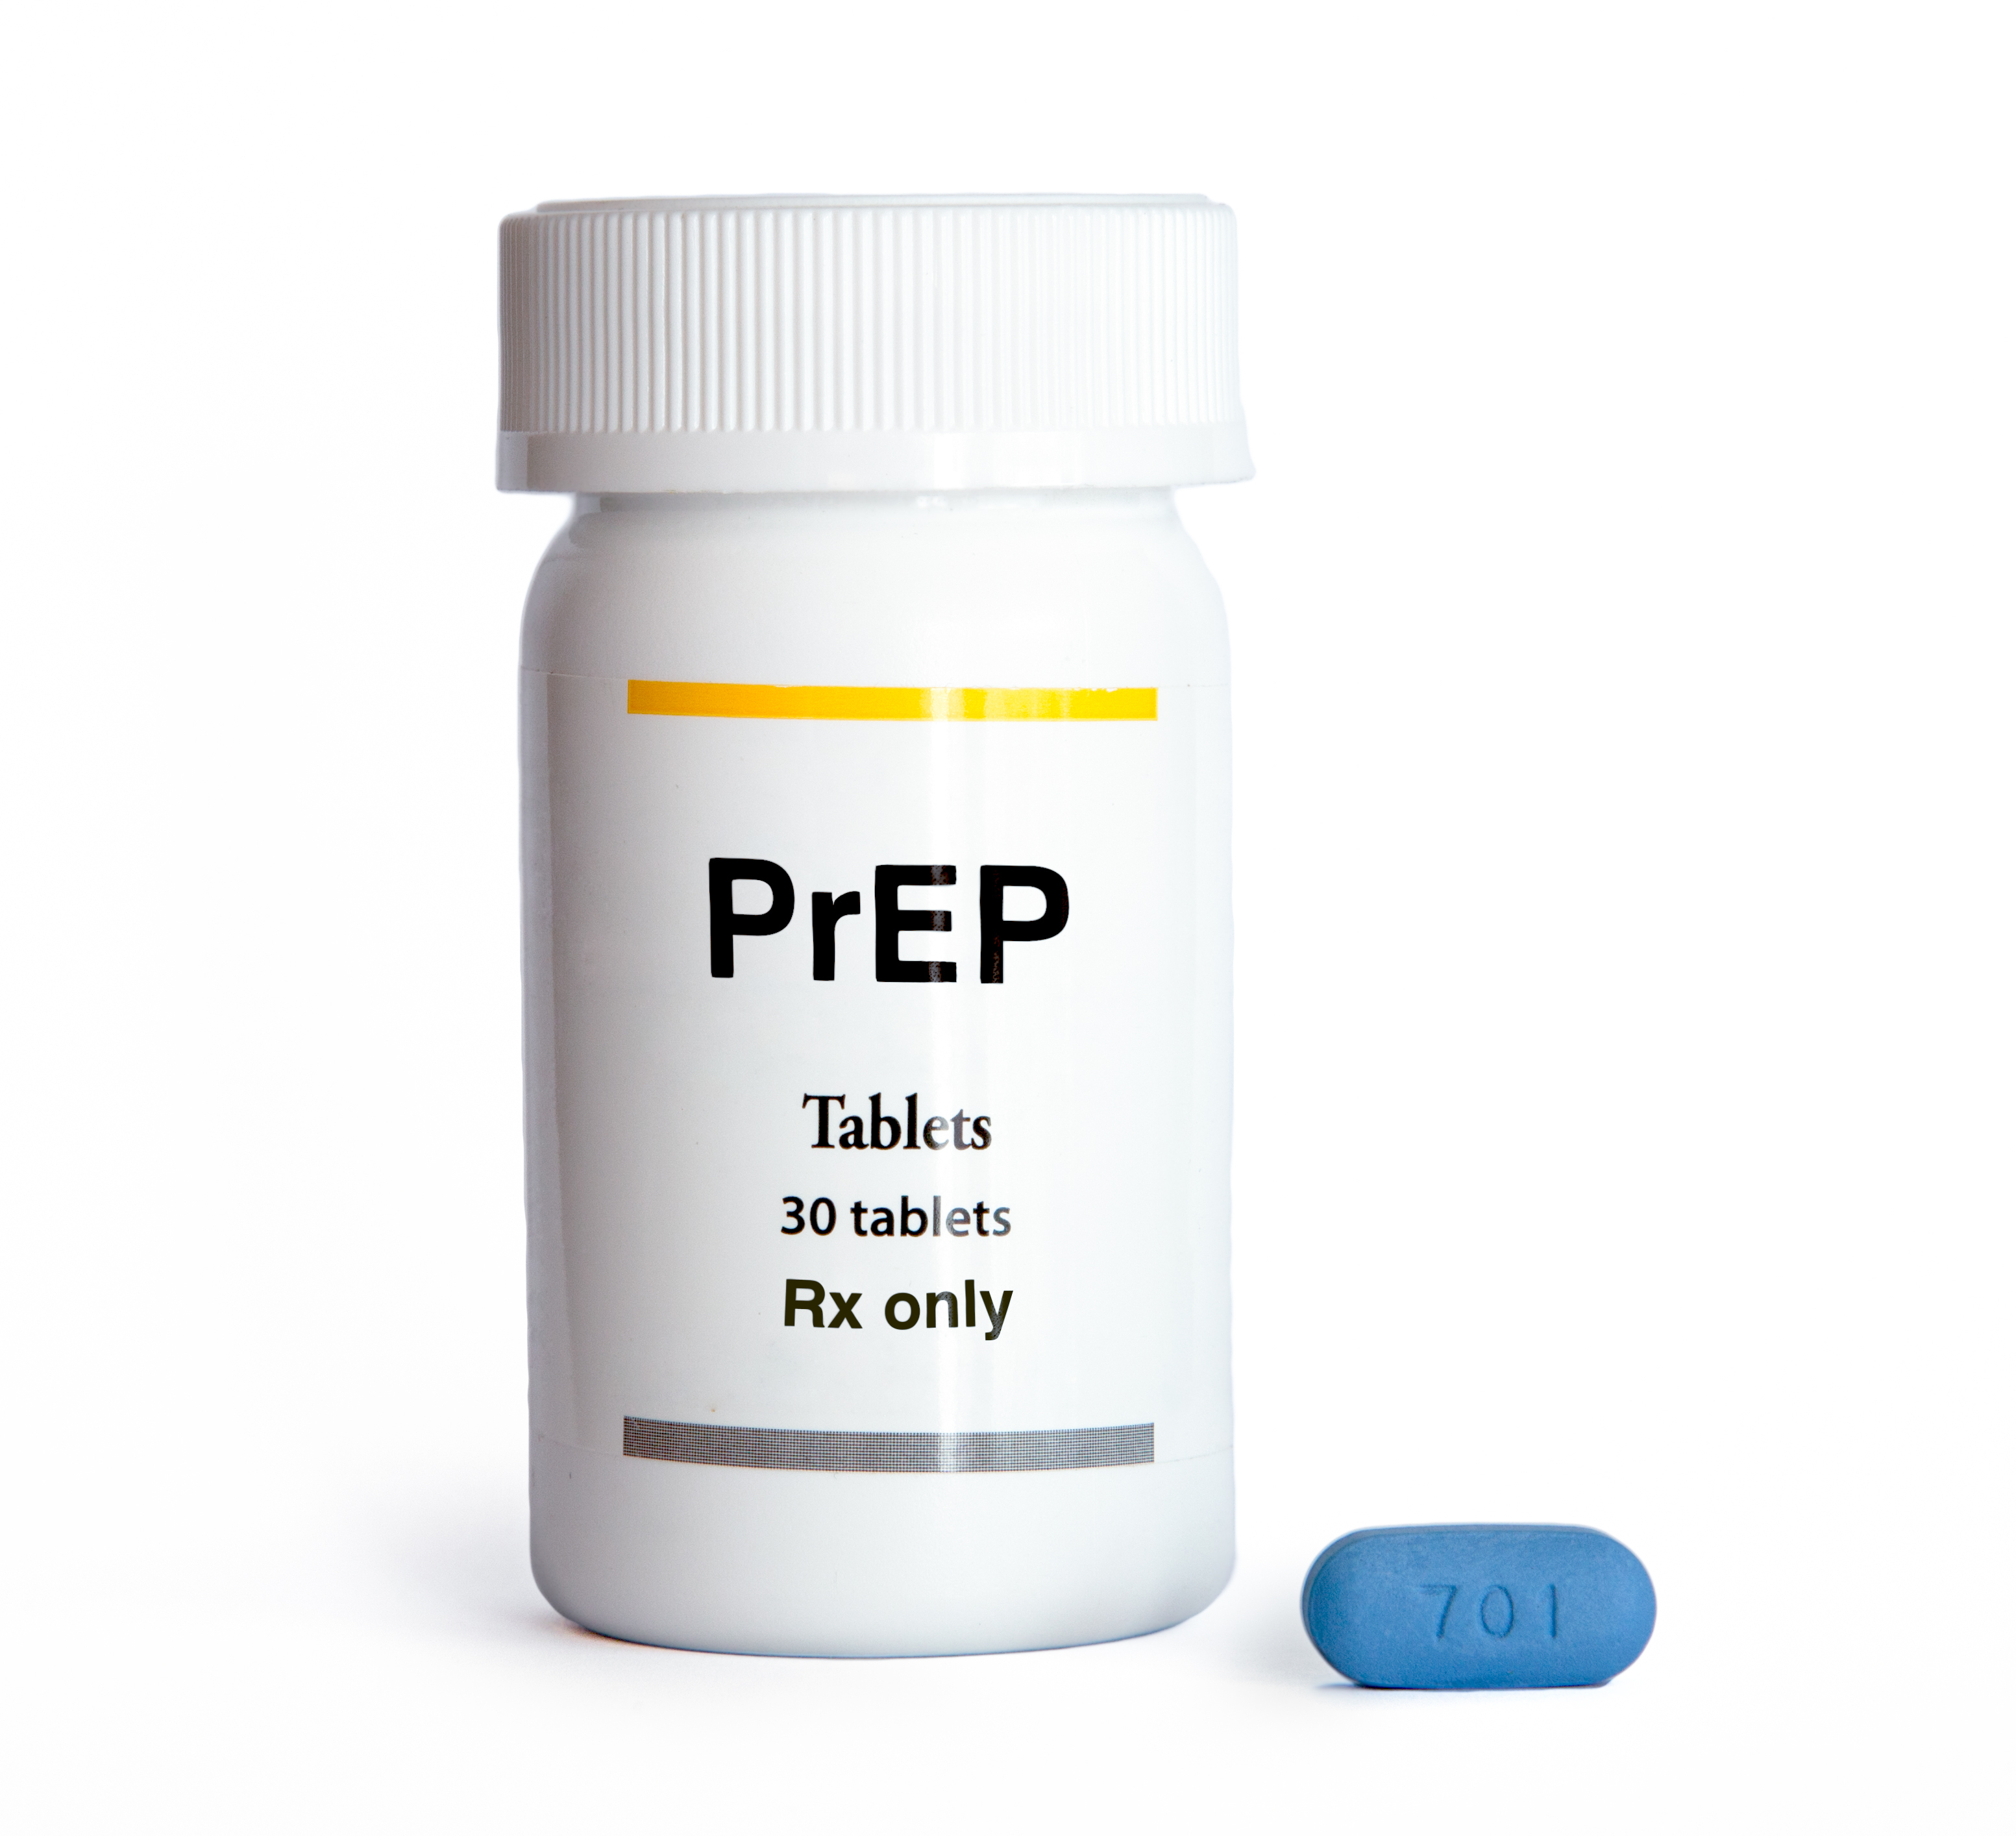 Generic image of a pill bottle that says "PrEP" on it